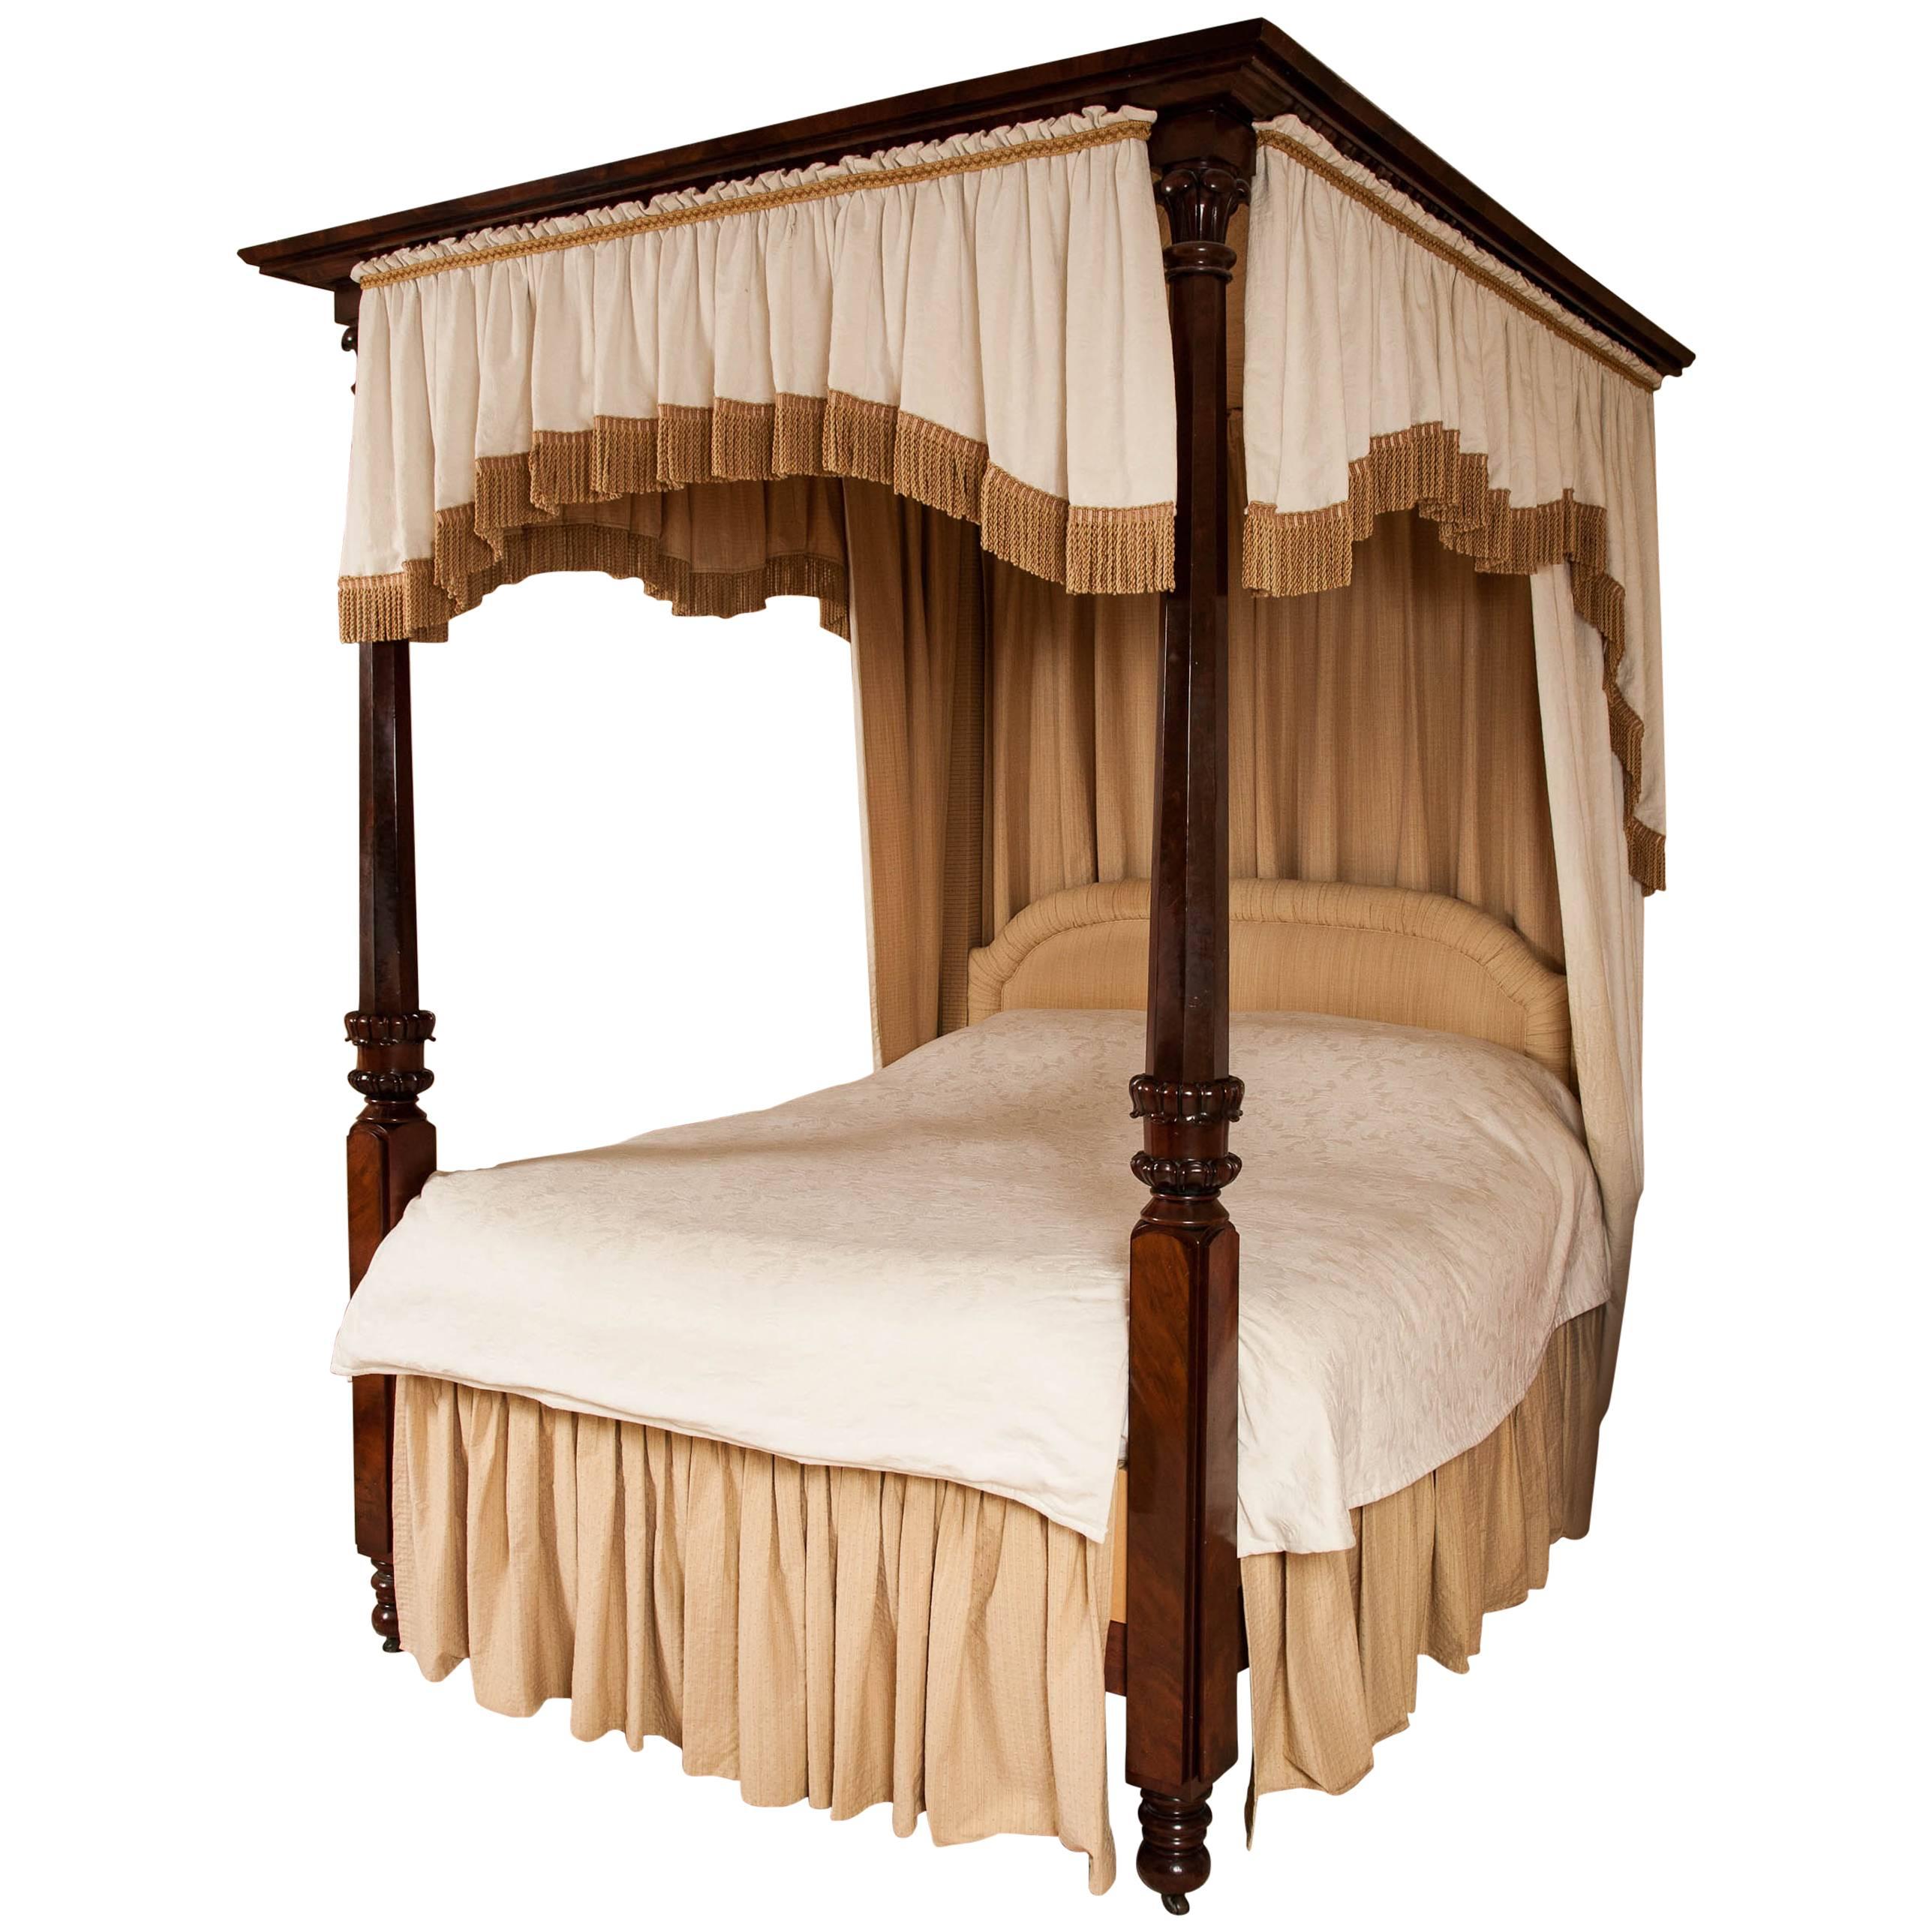 Four Poster Bed, 19th Century William IV Period Mahogany Attributable to Gillows For Sale